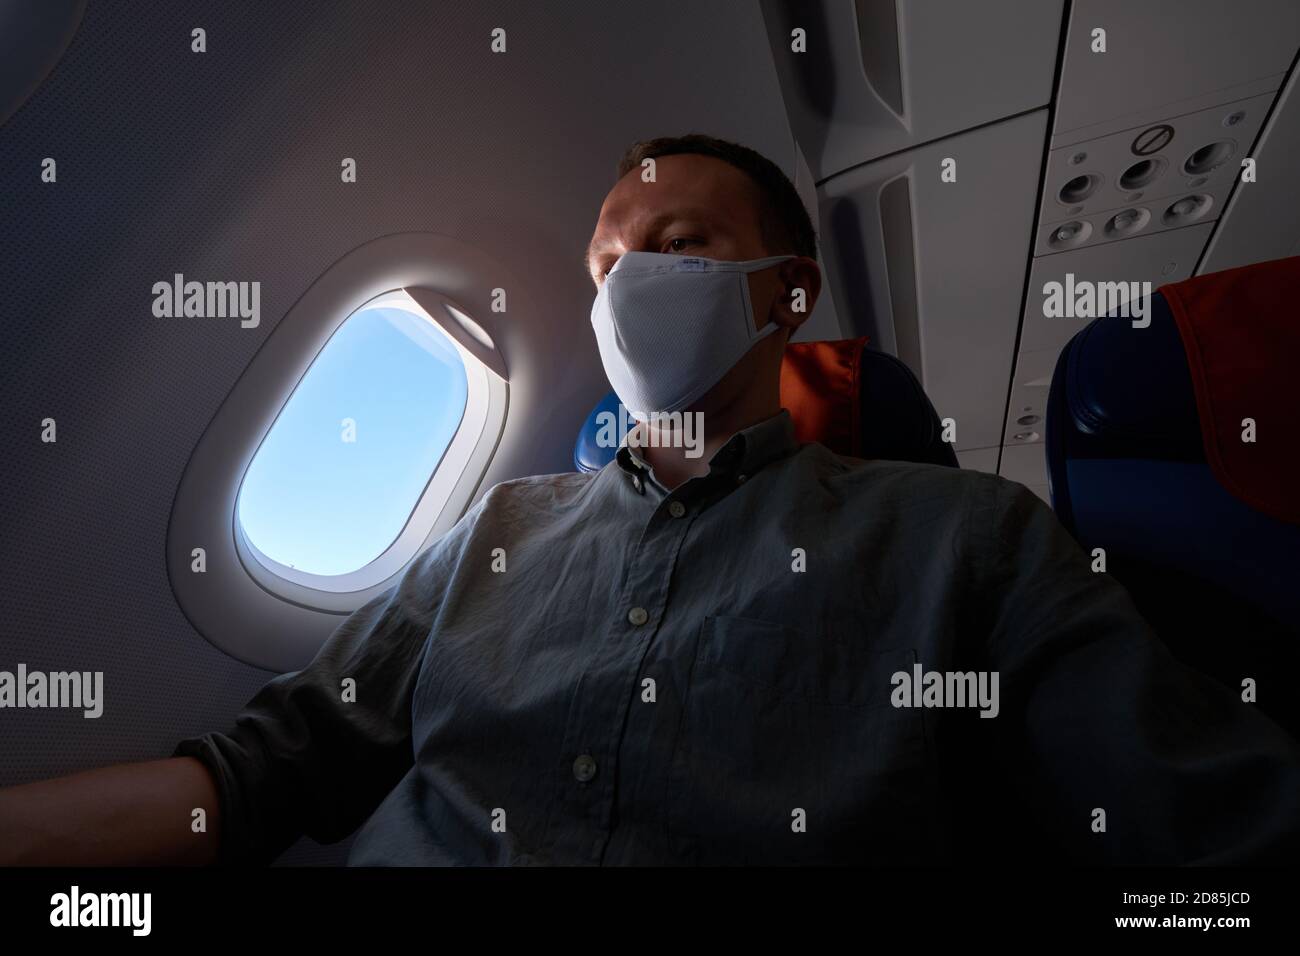 Passenger wearing mask in an airplane Stock Photo